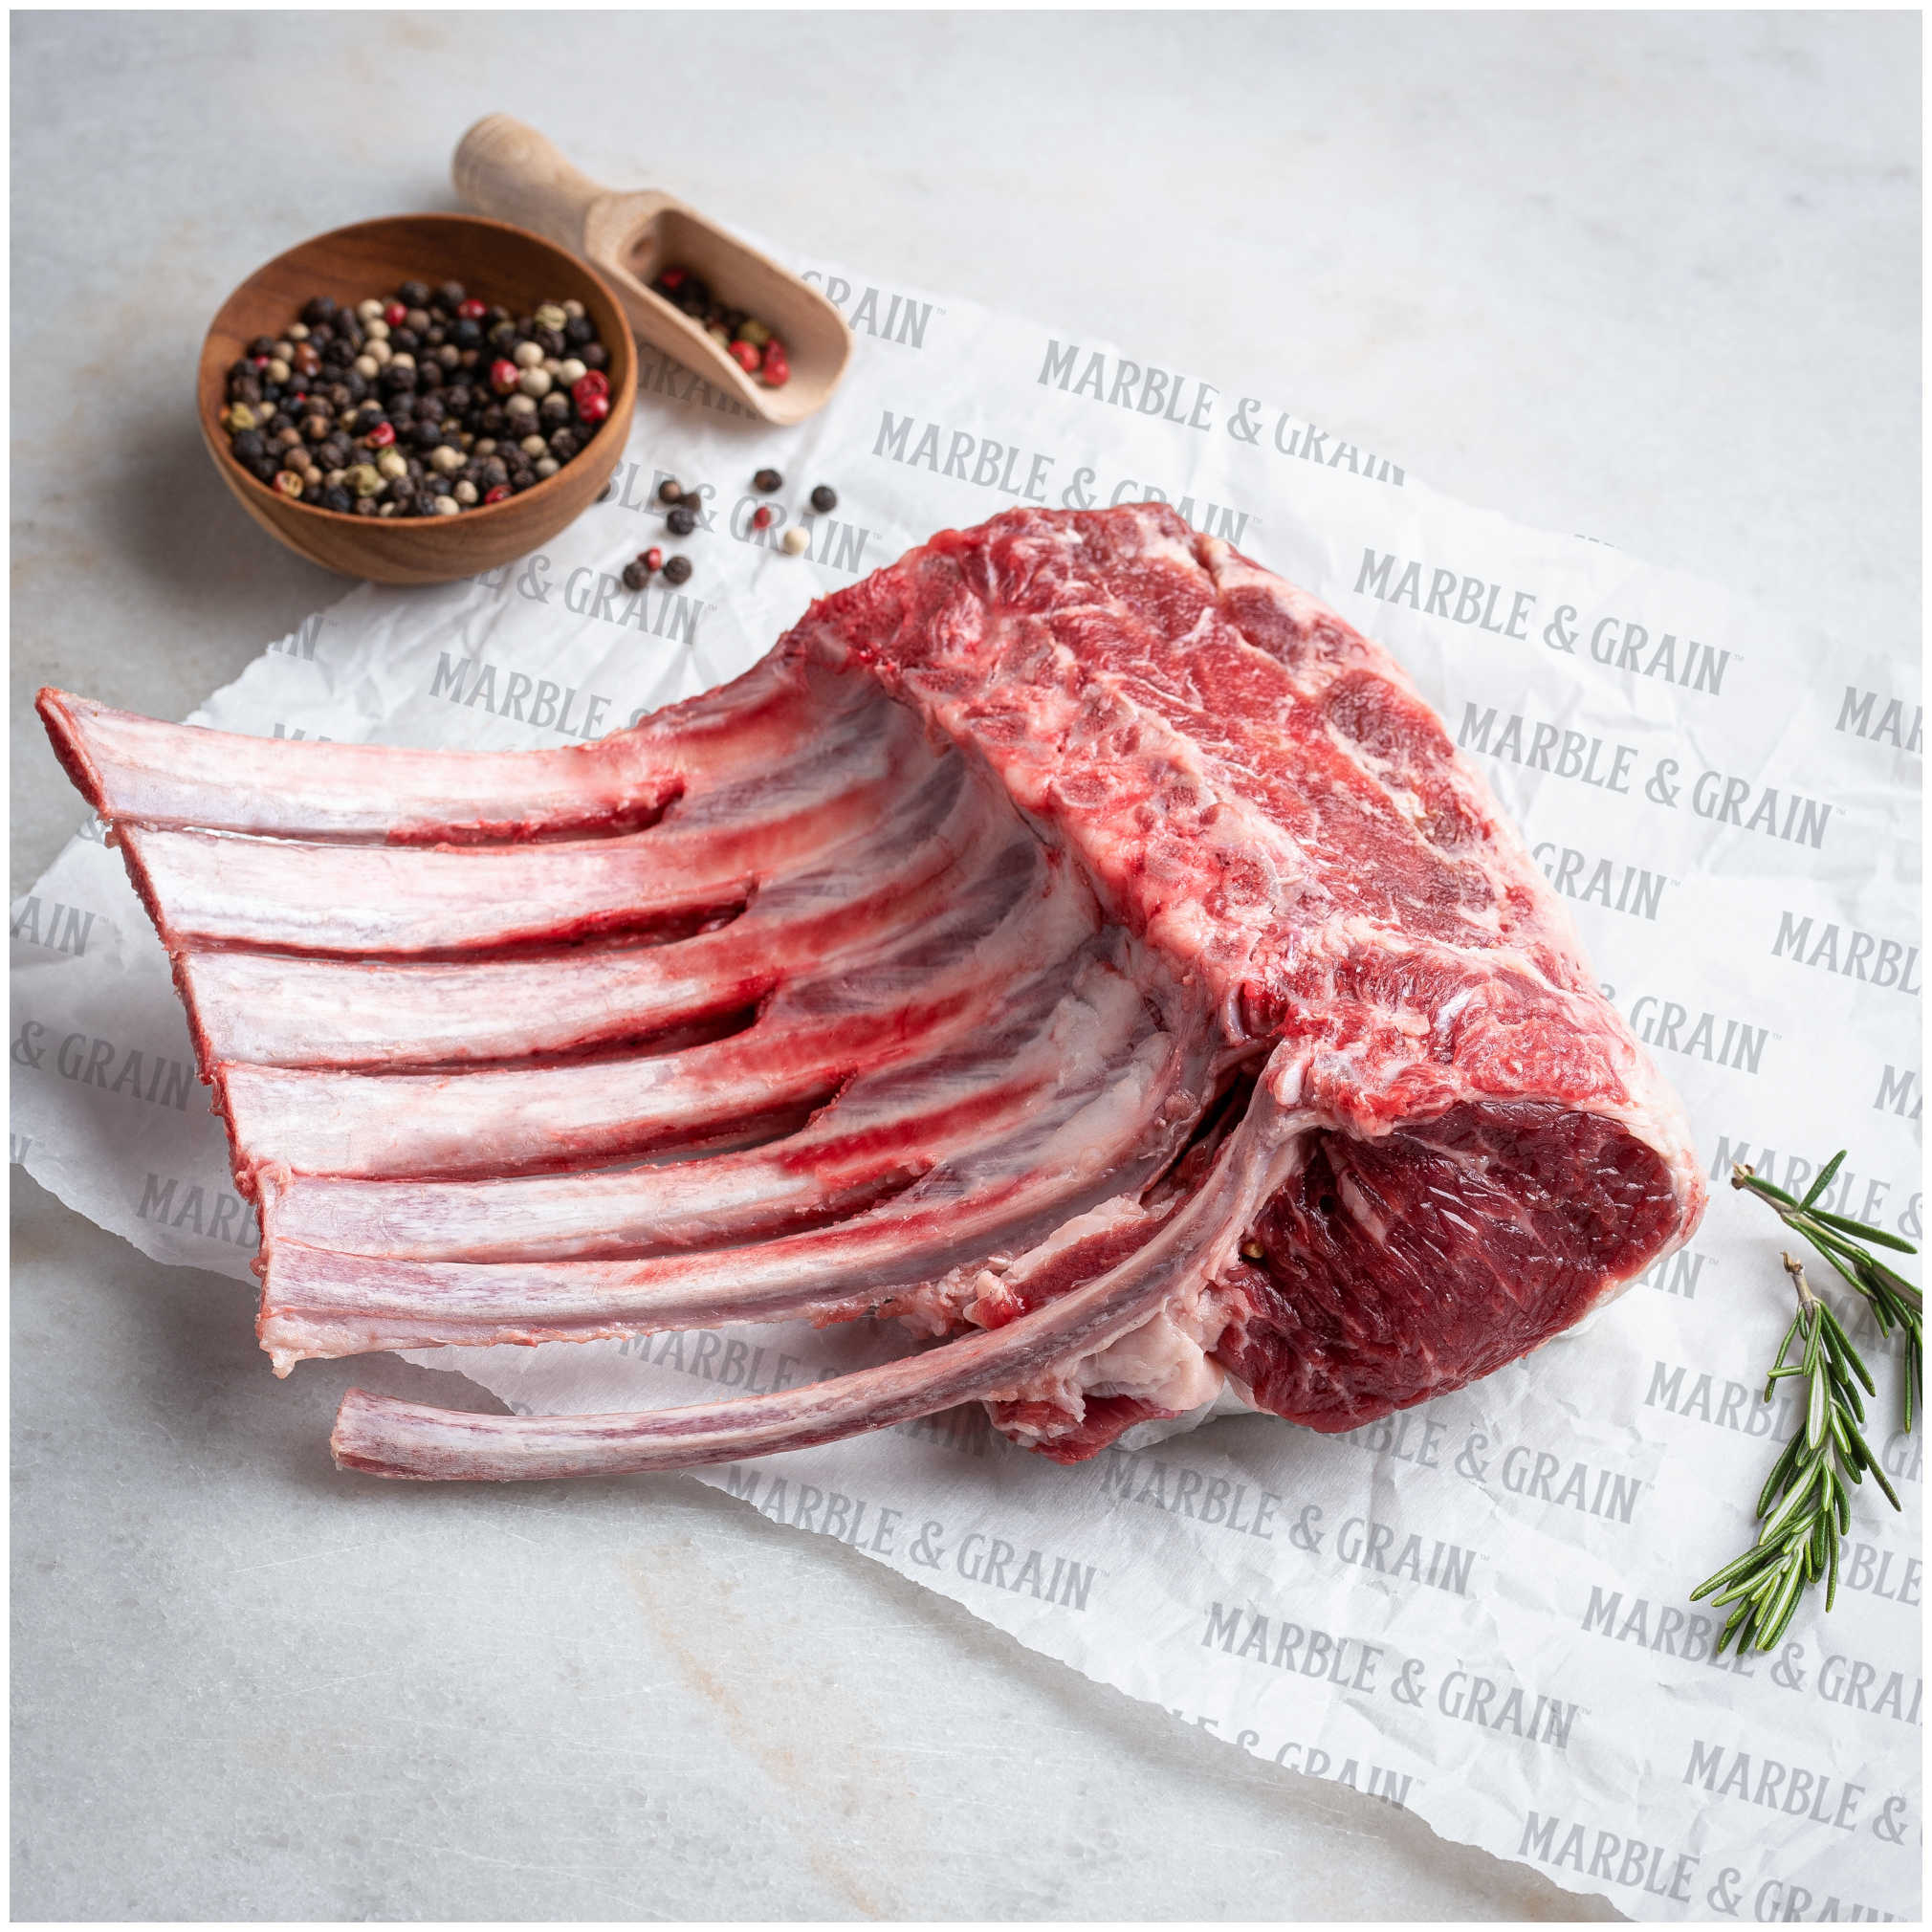 Marble & Grain Rack of Lamb, 8-Bone Frenched 1 pc | 2 - 2.5 lbs